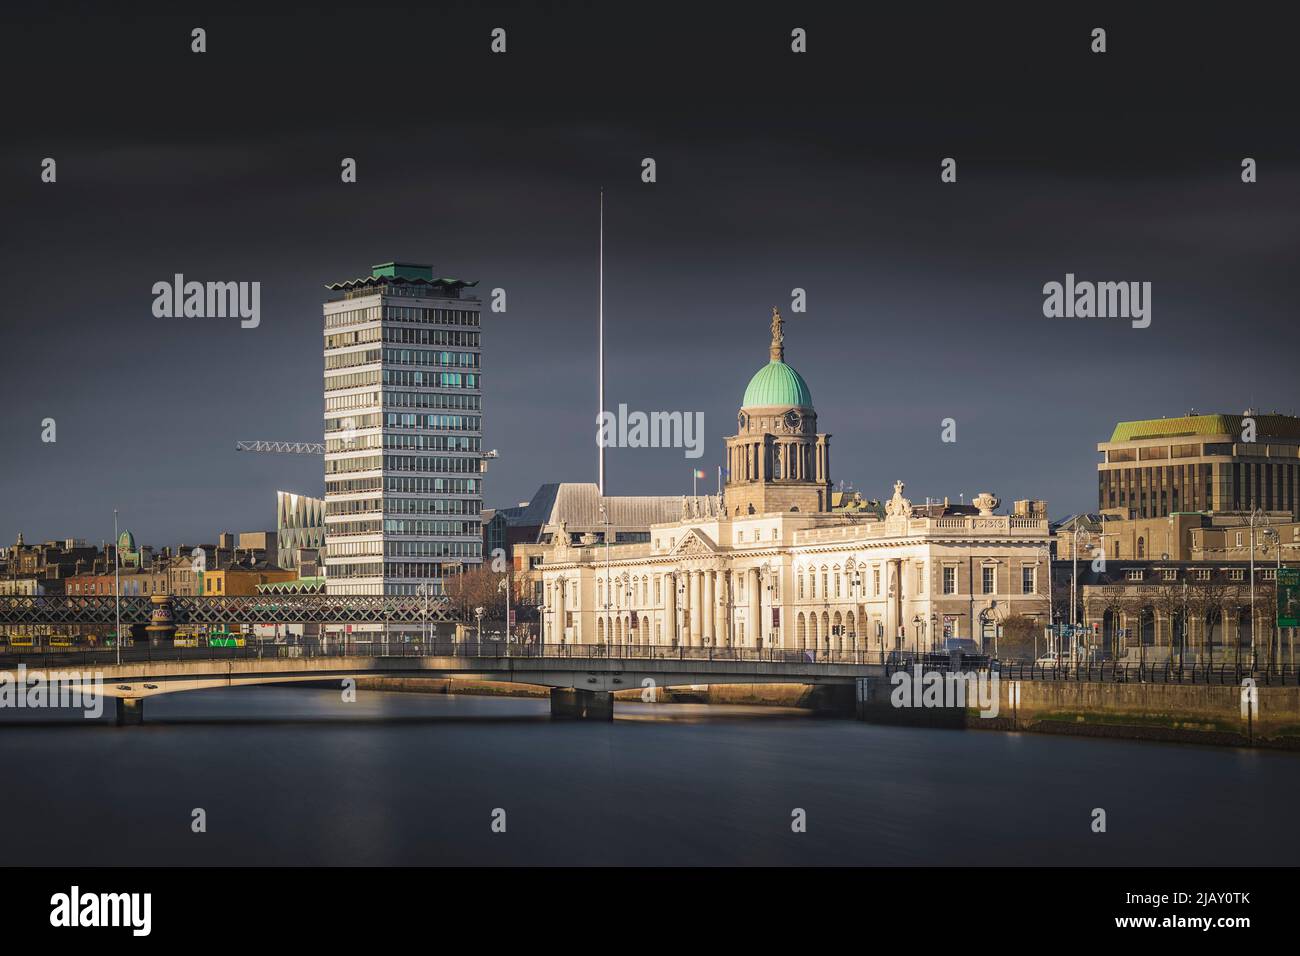 Dublin skyline with Custom House, Liberty Hall and Talbot Memorial Bridge over Liffey River in the foreground. Ireland. Stock Photo